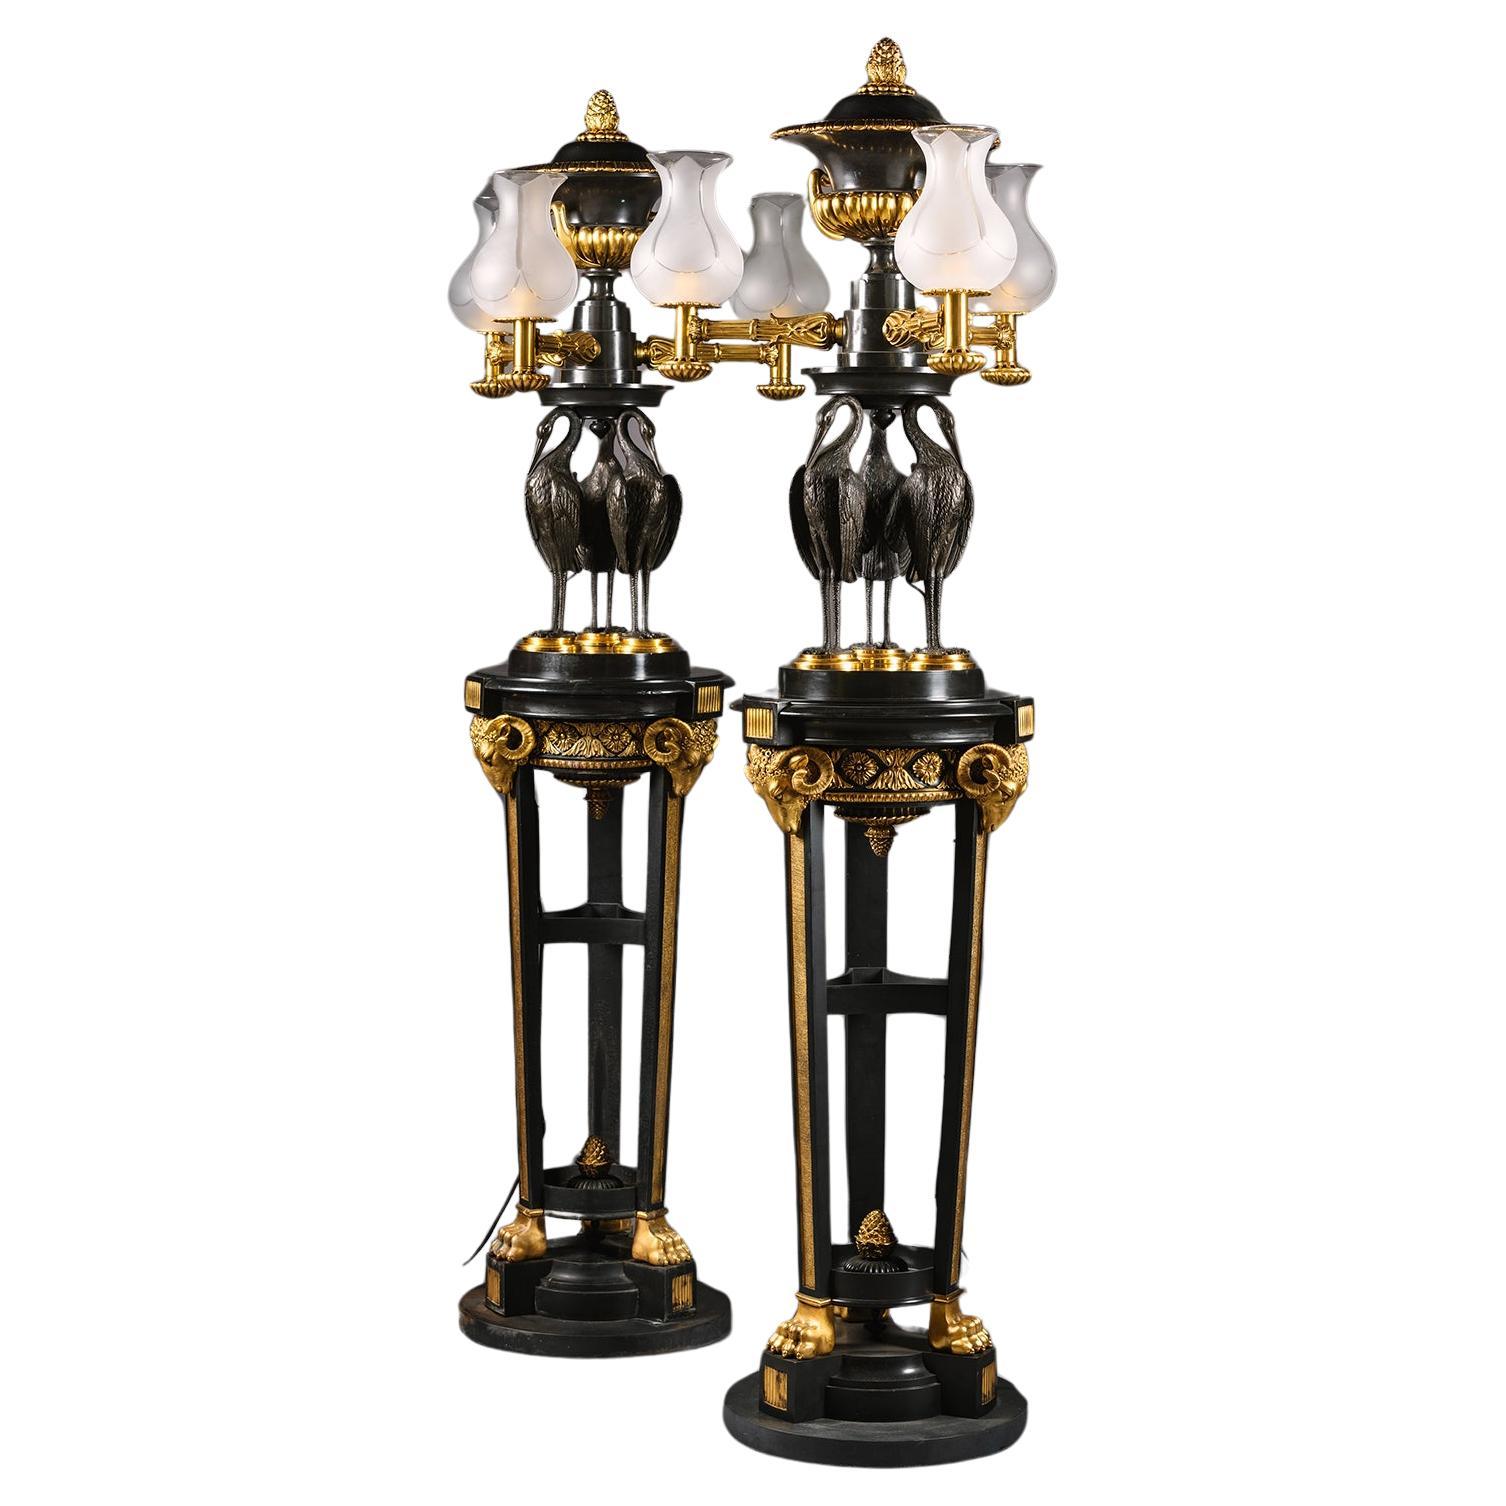 A Pair of Regency Style Gilt and Patinated Bronze Floor Lamps or 'Torchères' For Sale